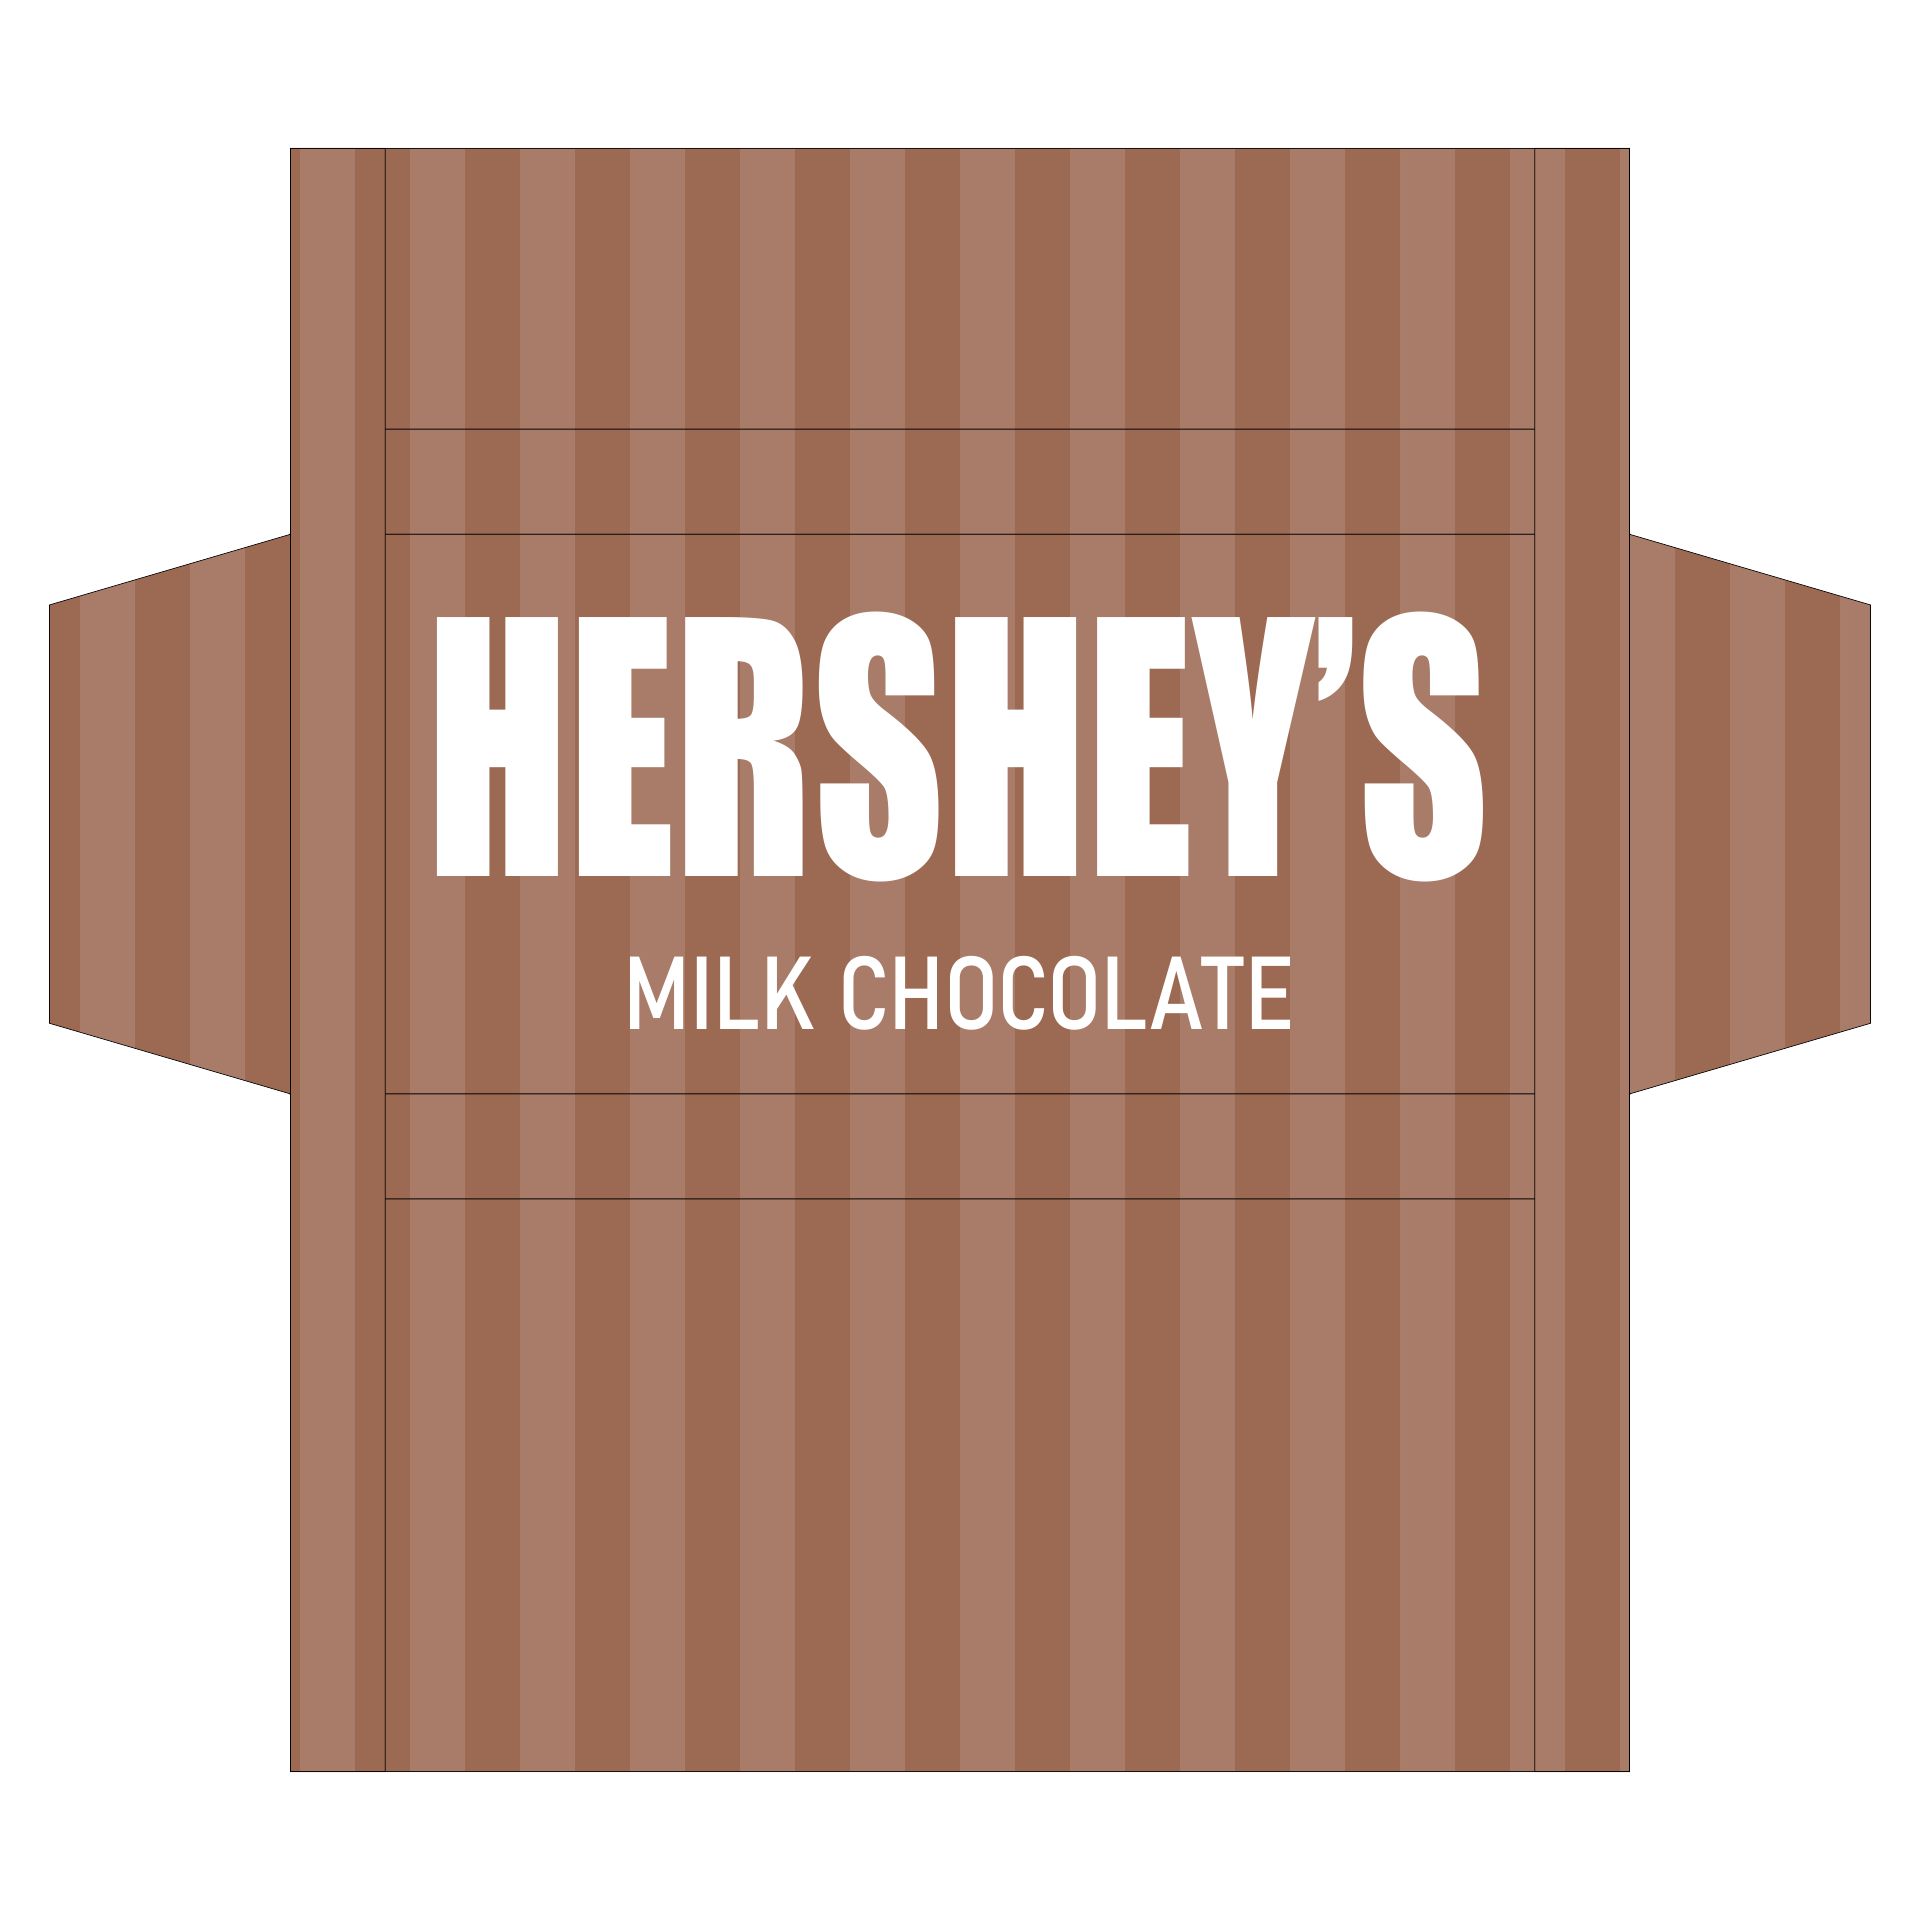 free templates for candy bar wrappers